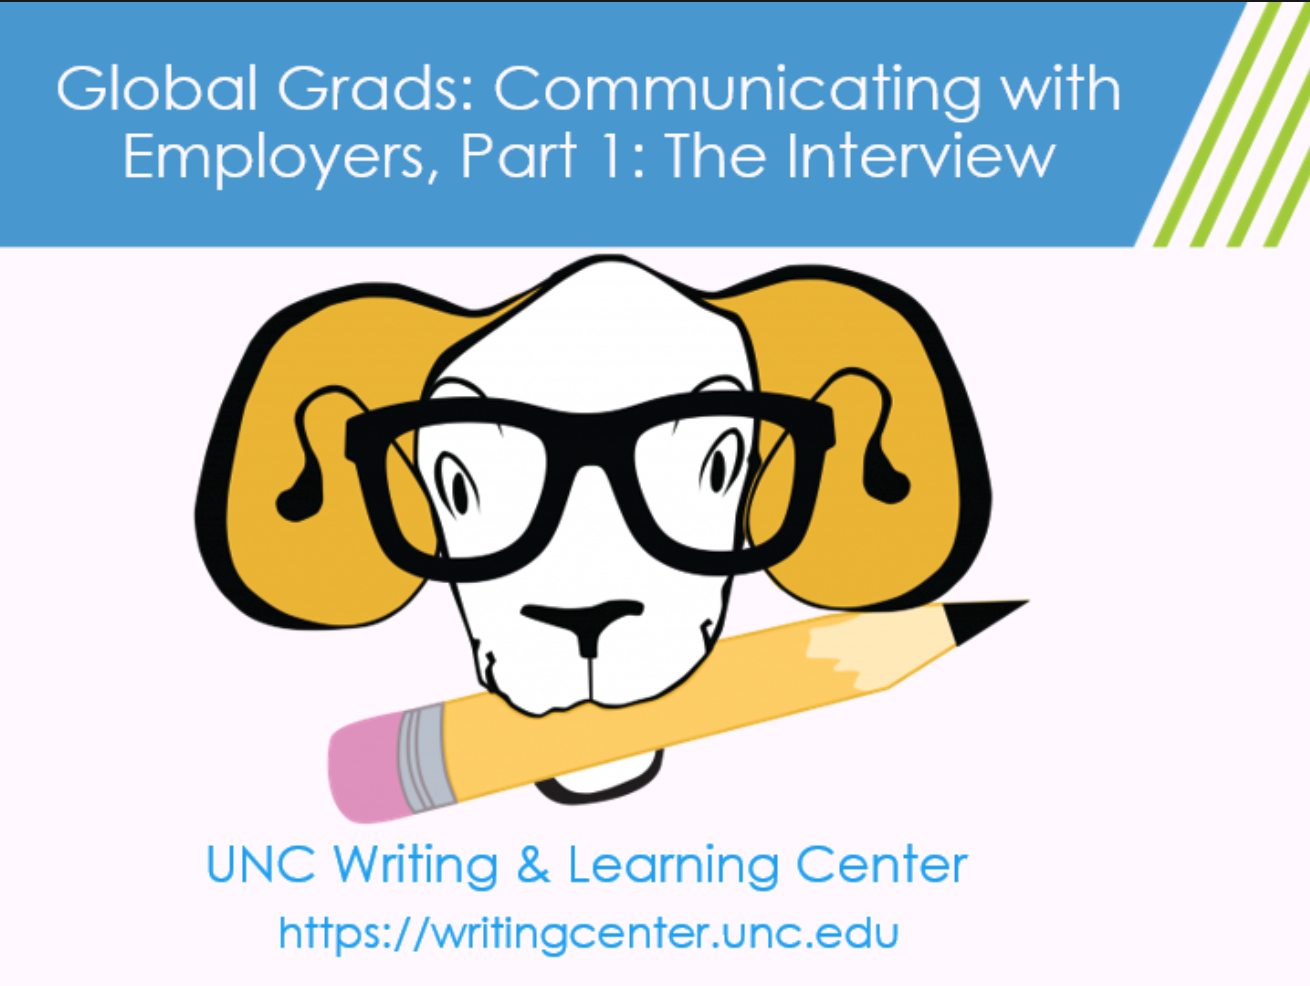 Cartoon ram wearing classes and holding a pencil in its mouth. Text Says "global grads communicating with employers, part 1: the interview" "unc writing & learning center"